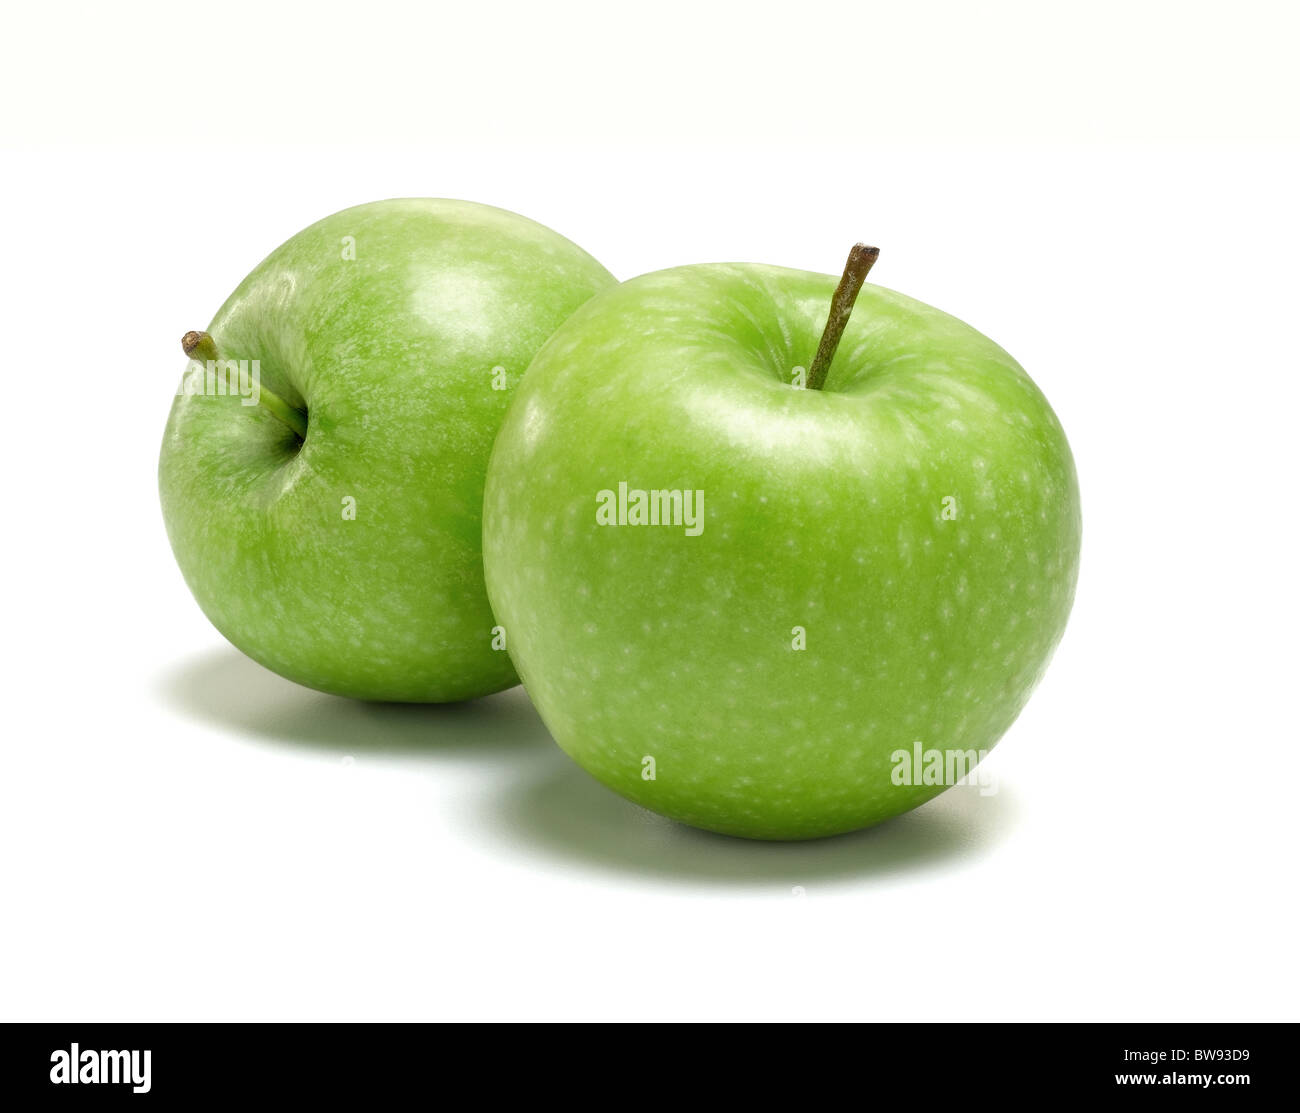 two green granny smiths apples for cut out Stock Photo